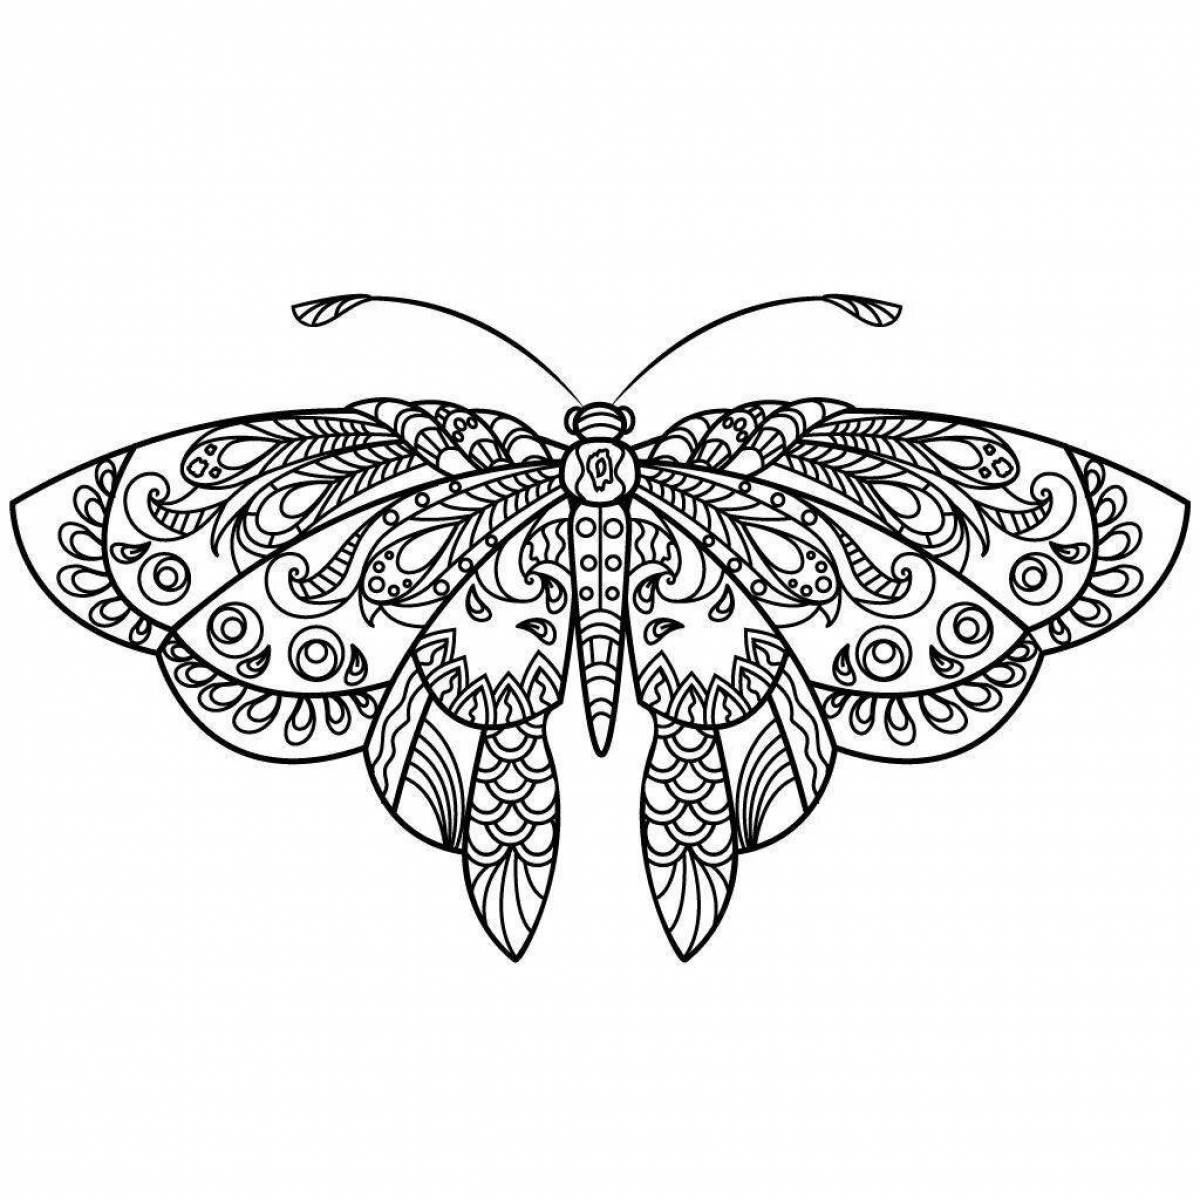 Coloring book shining anti-stress butterfly